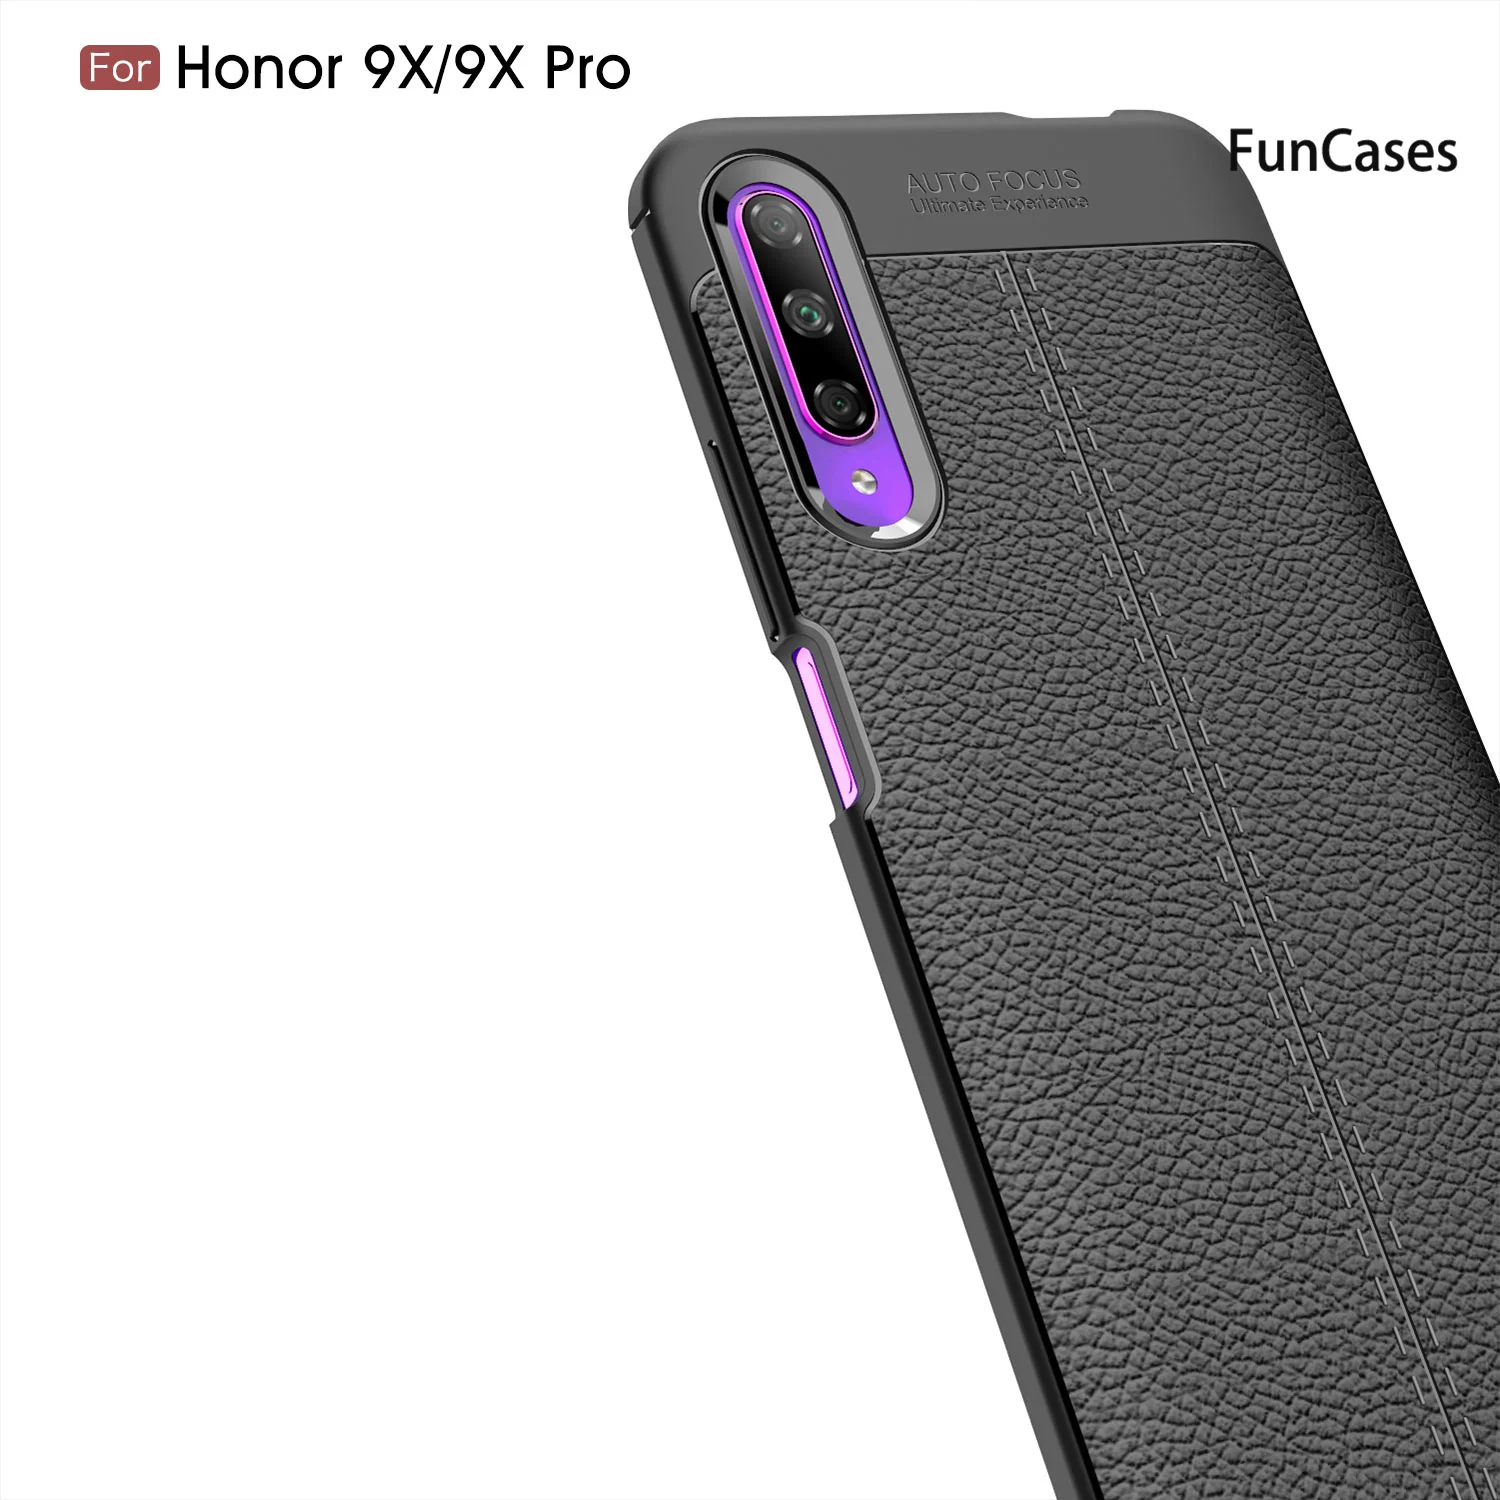 Bitterheid Terzijde archief Cool Lychee Pattern Protector Cover For telefoon Huawei Honor 9X Cell  Phones sFor Huawei phone case Honor 9X Pro Y9S P Smart|Phone Case & Covers|  - AliExpress